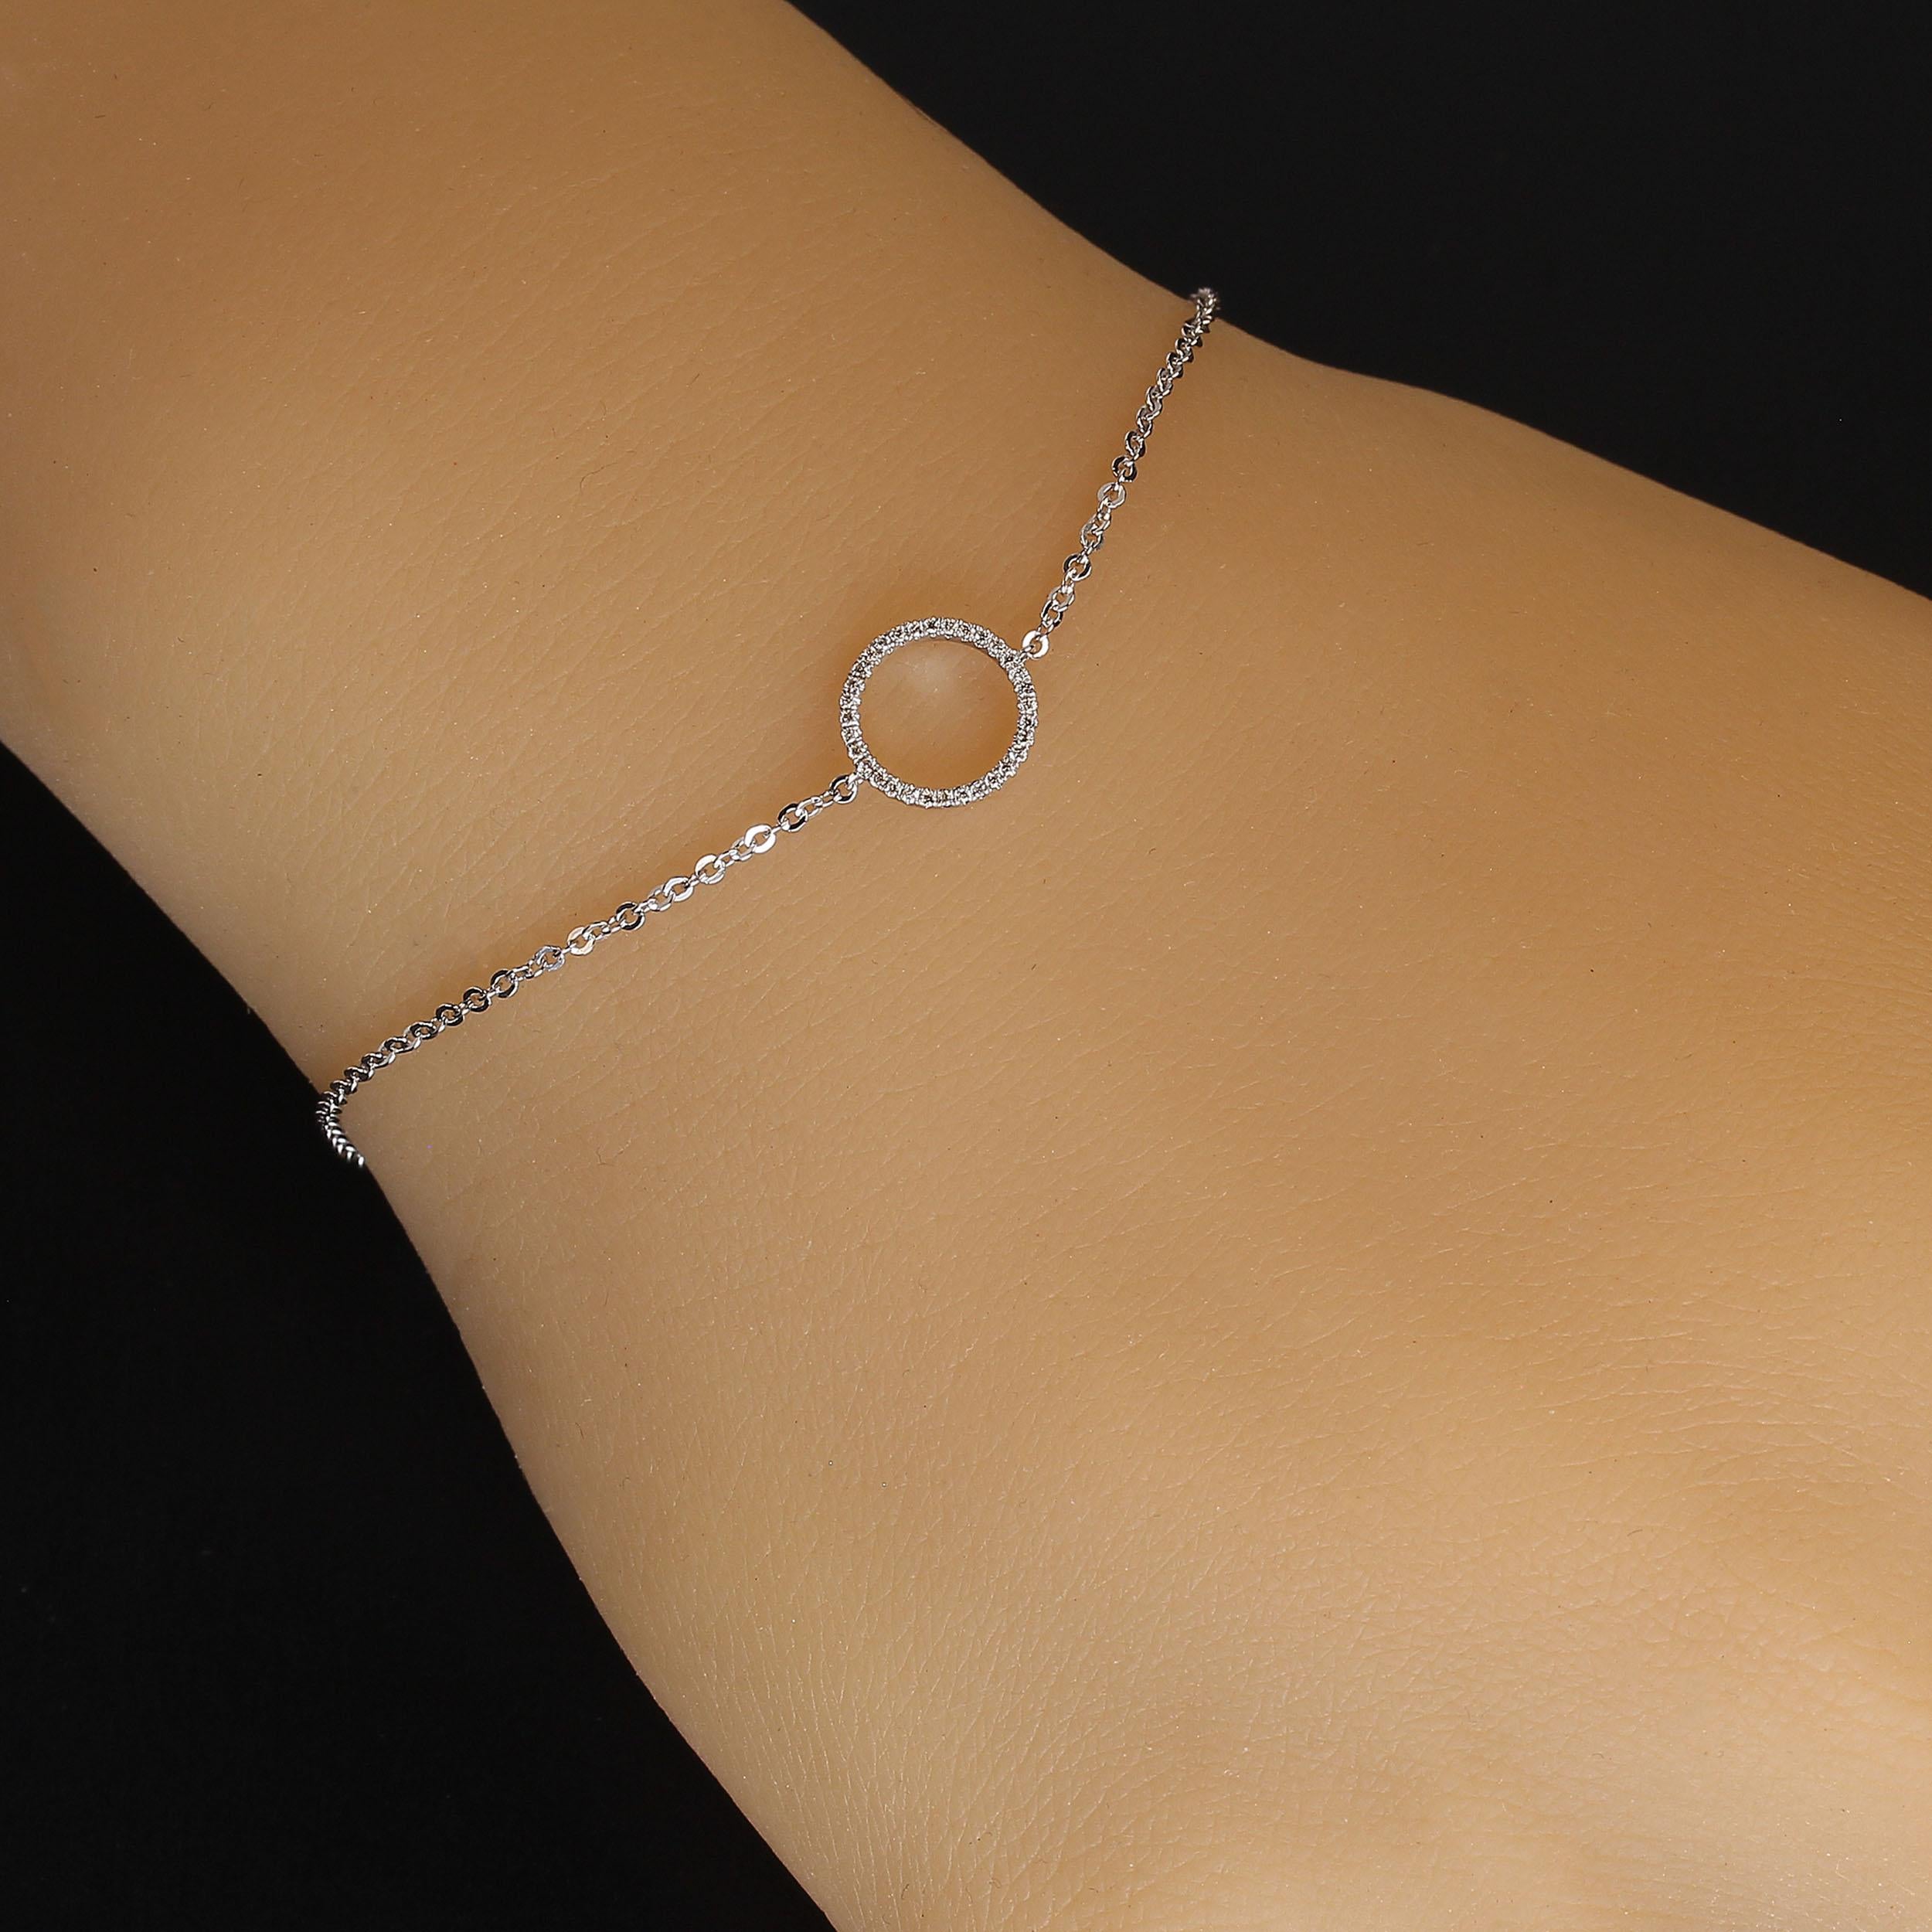 Diamond Circle Bracelet or Ankle Bracelet in 7 inch elegant 14K white gold to grace your wrist. The diamond circle features 0.07cts of sparkling diamonds. This lovely bracelet also has stations at 6 and 6.5 inches in the chain which is flashly and